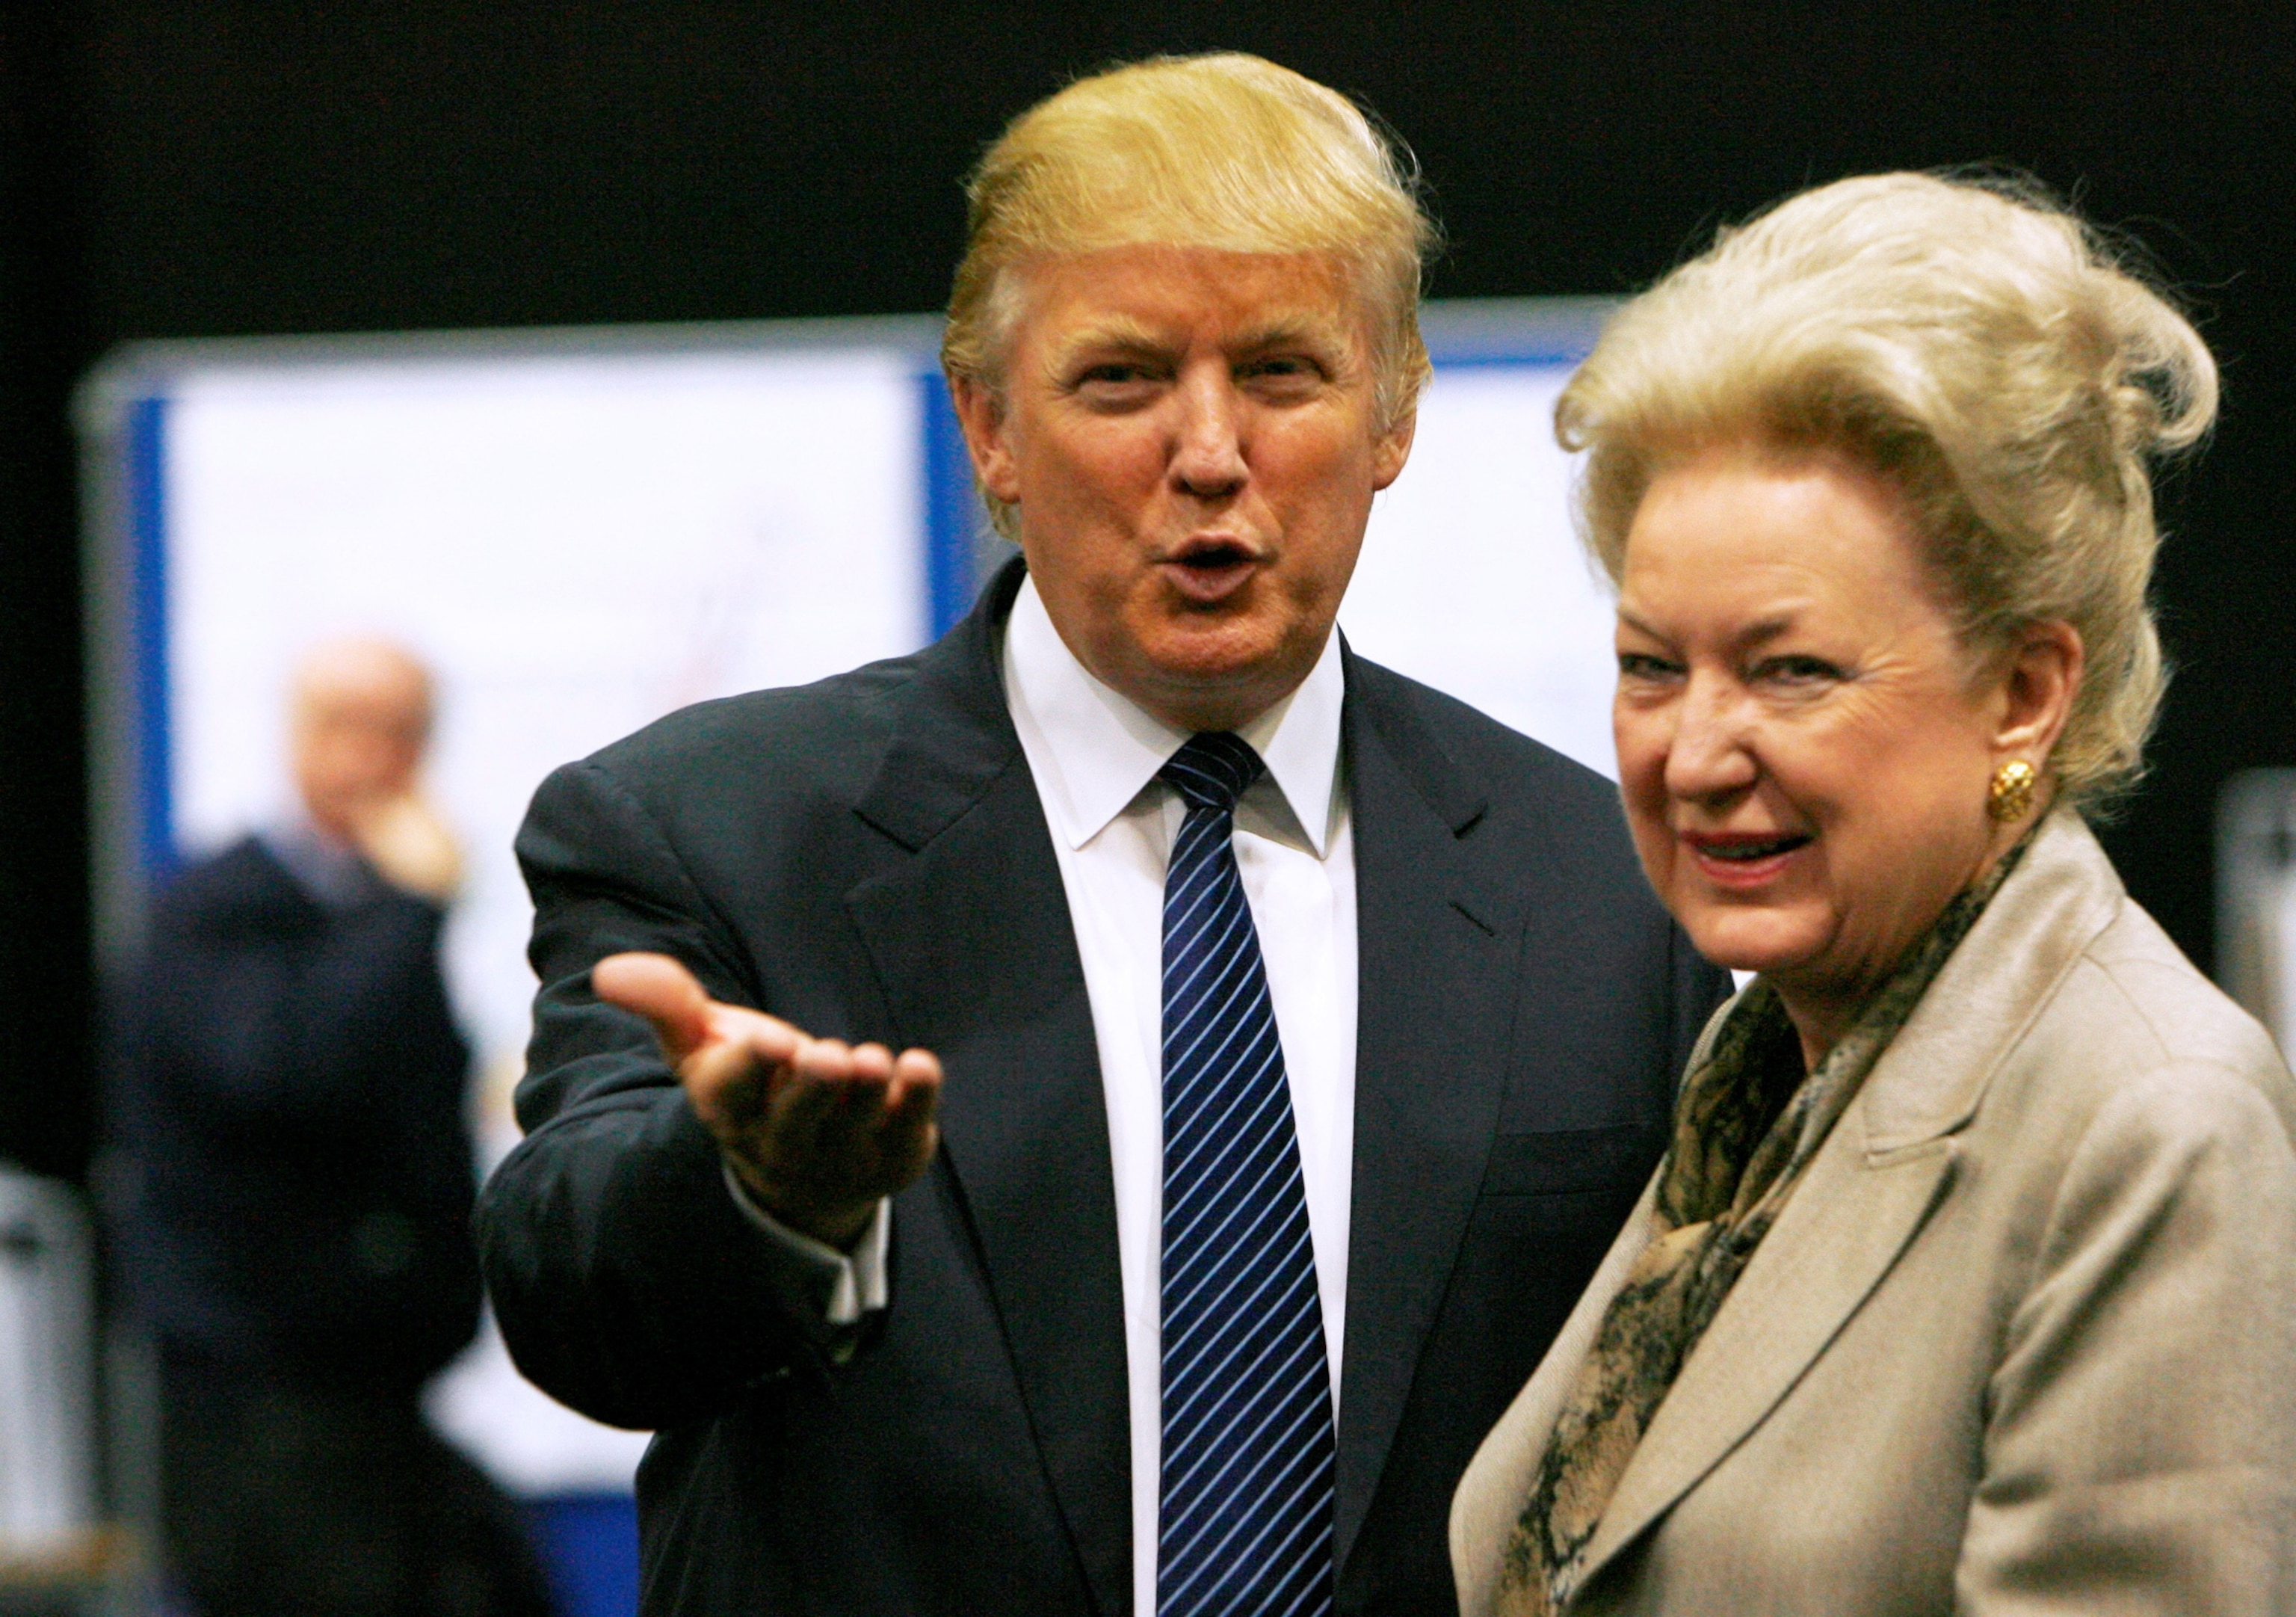 PHOTO: Donald Trump gestures as he stands next to his sister Maryanne Trump Barry, during a break in proceedings of the Aberdeenshire Council inquiry into his plans for a golf resort, Aberdeen, northeast Scotland, June 10, 2008.